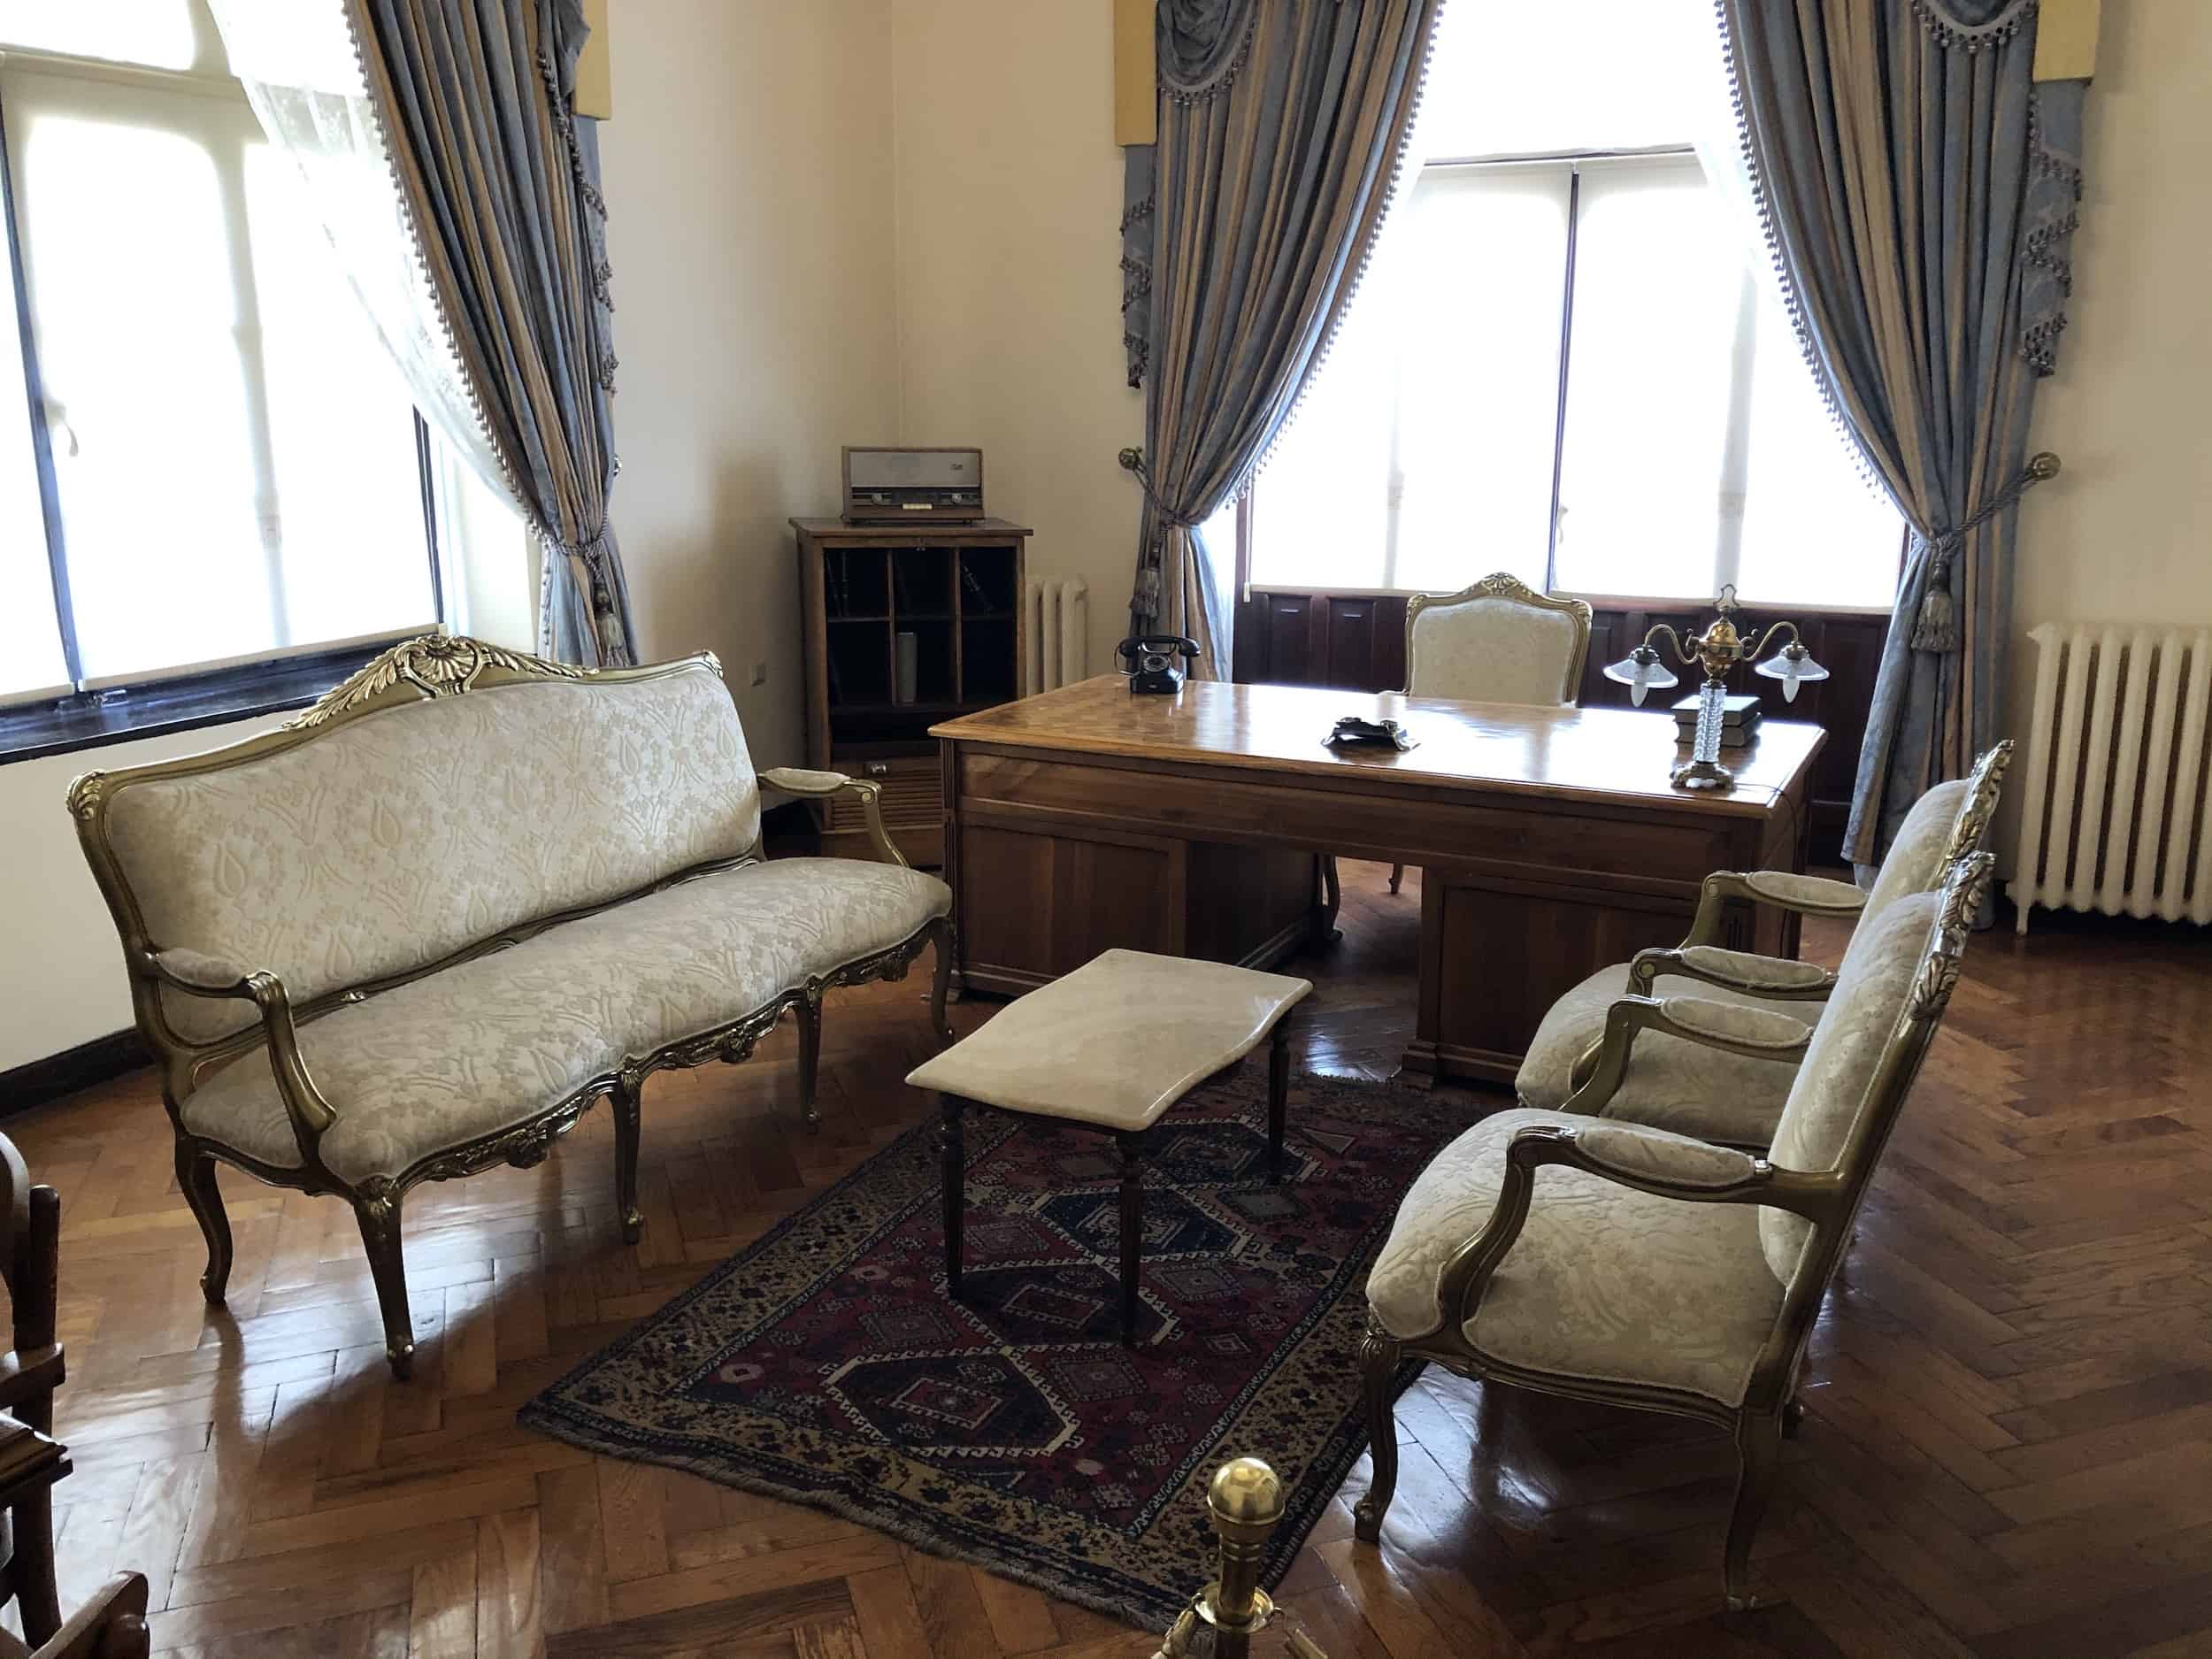 Prime Minister's Study at the Republic Museum at the Second Grand National Assembly of Turkey in Ulus, Ankara, Turkey